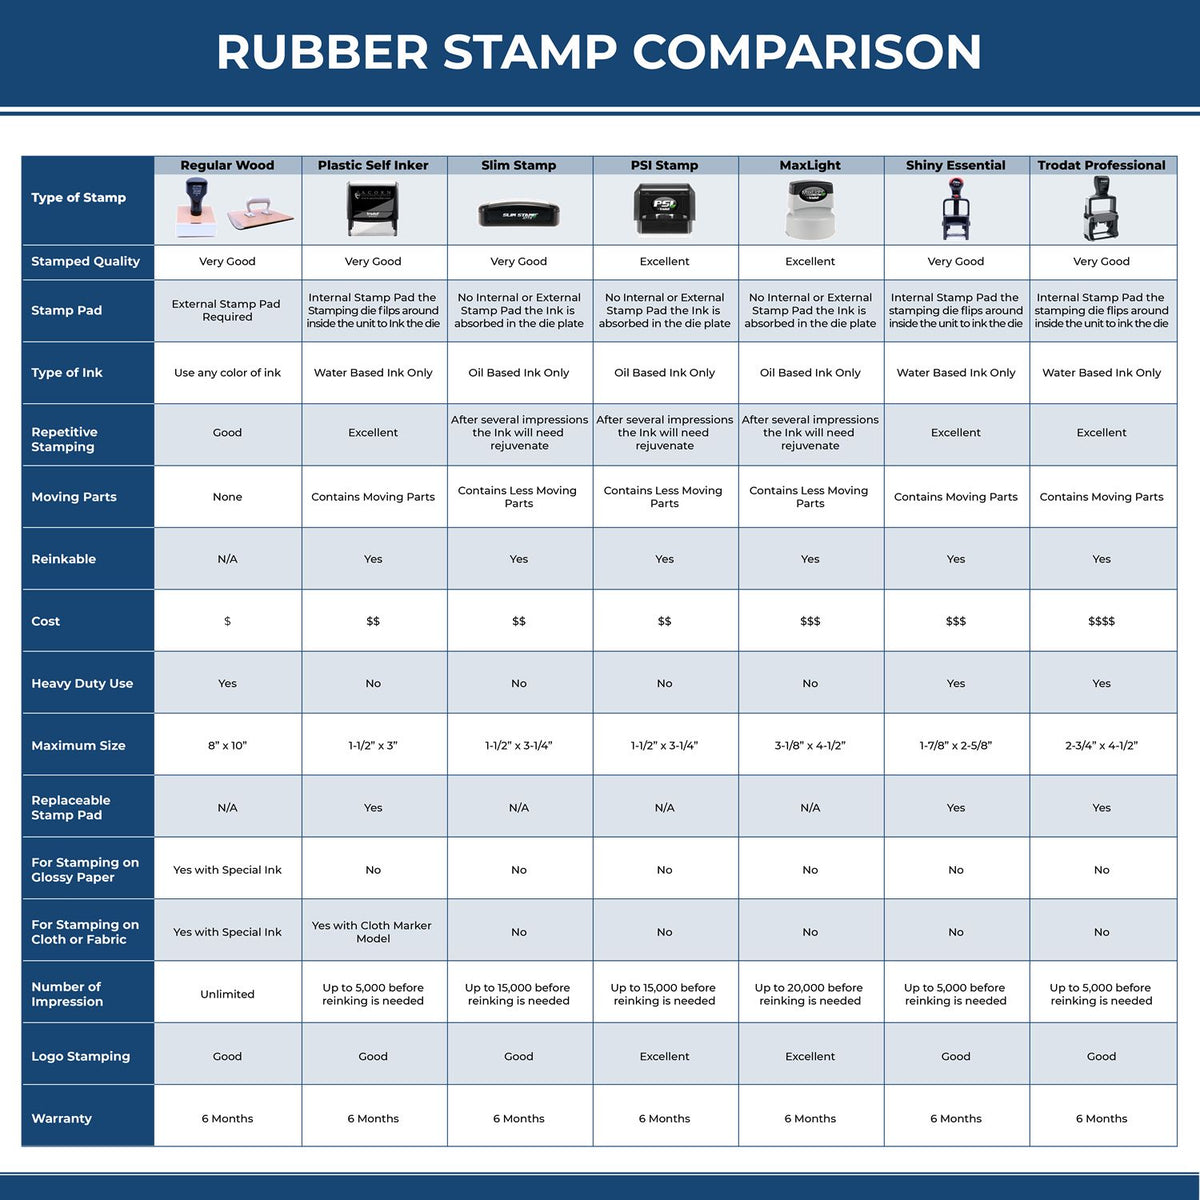 Large Void with X Rubber Stamp 5666R Rubber Stamp Comparison